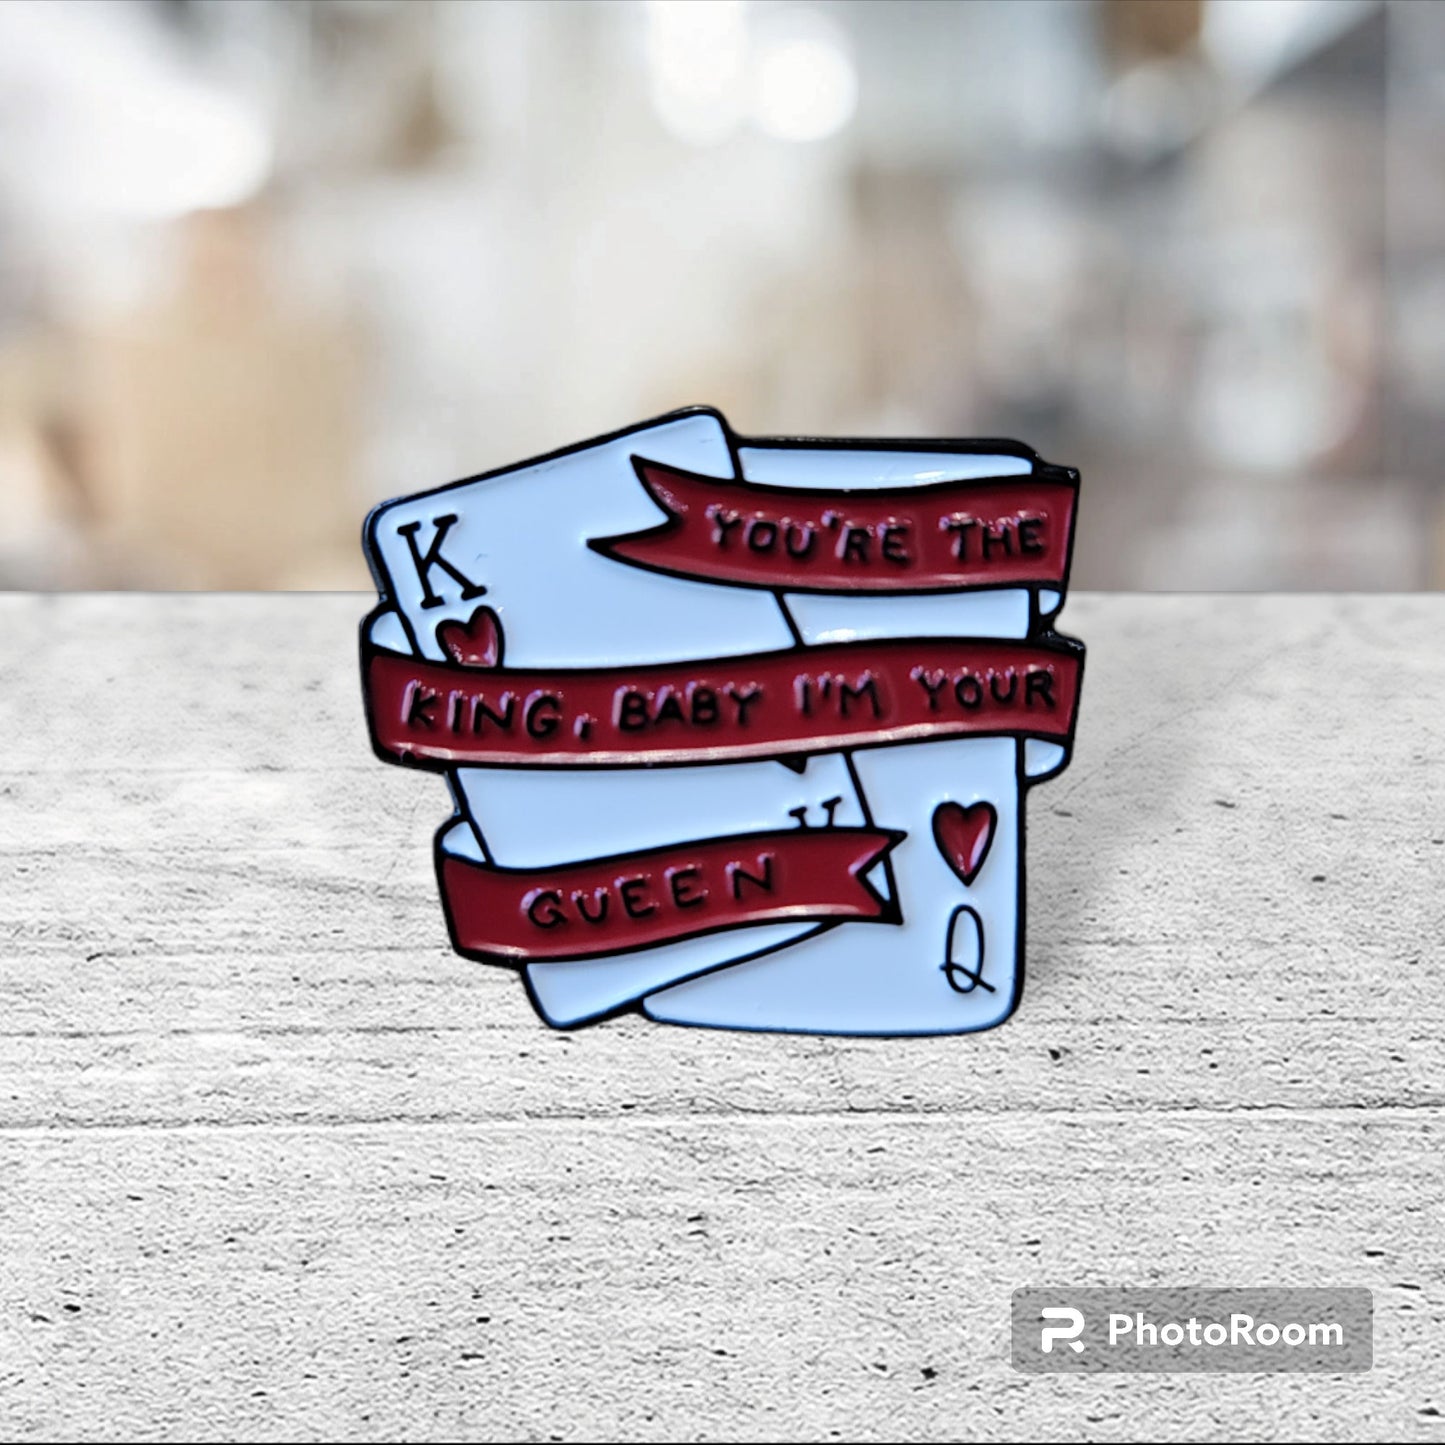 Taylor Swift Inspired Enamel Pin, Blank Space Inspired Enamel Pin, You're the King, Baby I'm Your Queen Enamel Pin